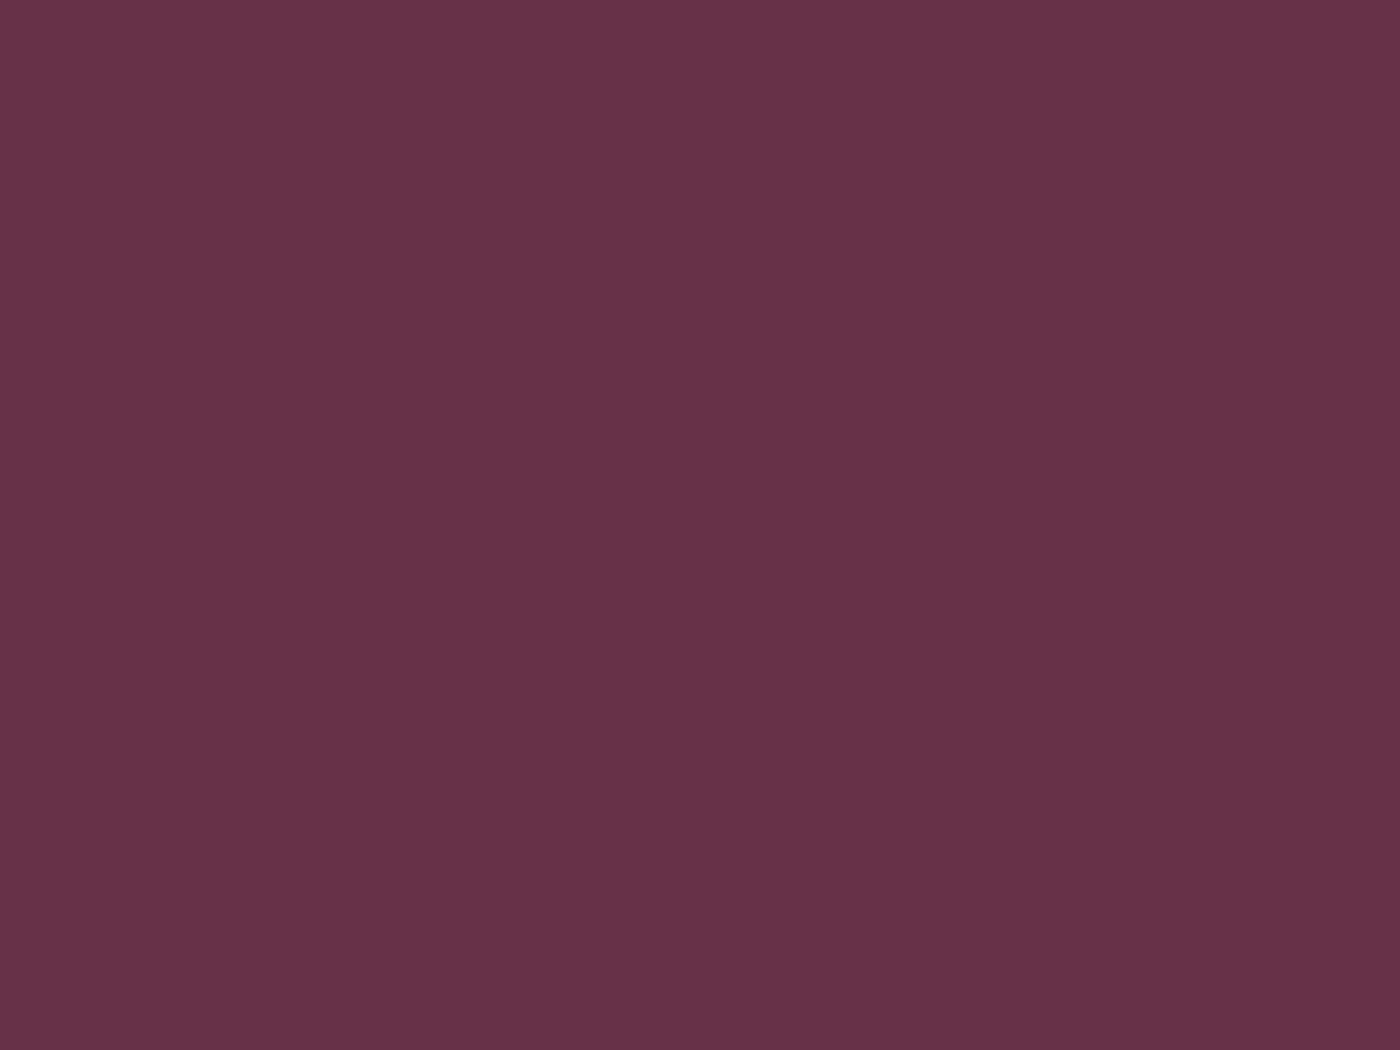 1400x1050 Wine Dregs Solid Color Background